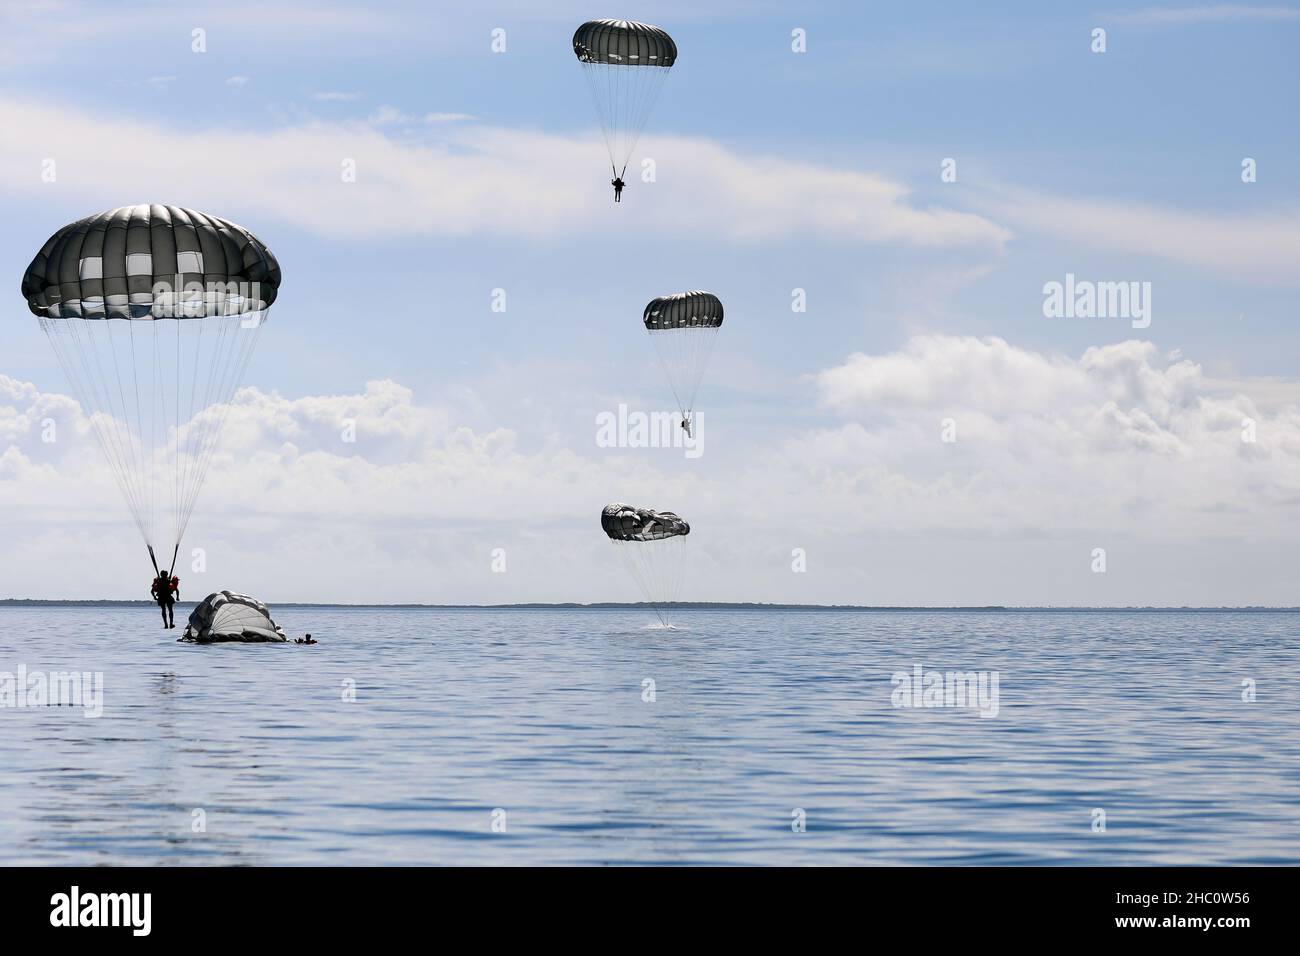 U.S. Army Reserve paratroopers from across the U.S. Army Civil Affairs and Psychological Operations Command (Airborne) descend into Biscayne Bay, Miami-Dade County Nov. 19, 2021, as part of a Deliberate Water Jump. The jump was the concluding event of the Army Reserve Airborne Safety Equipment and Evaluation Council held in Homestead, Florida.     The weeklong event, hosted by the 478th Civil Affairs Battalion (Airborne), located at Perrine, Florida, 1st Civil Affairs and Psychological Operations Training Brigade, included a Jumpmaster Refresher course, the AR-ASEEC, airborne operations at Hom Stock Photo